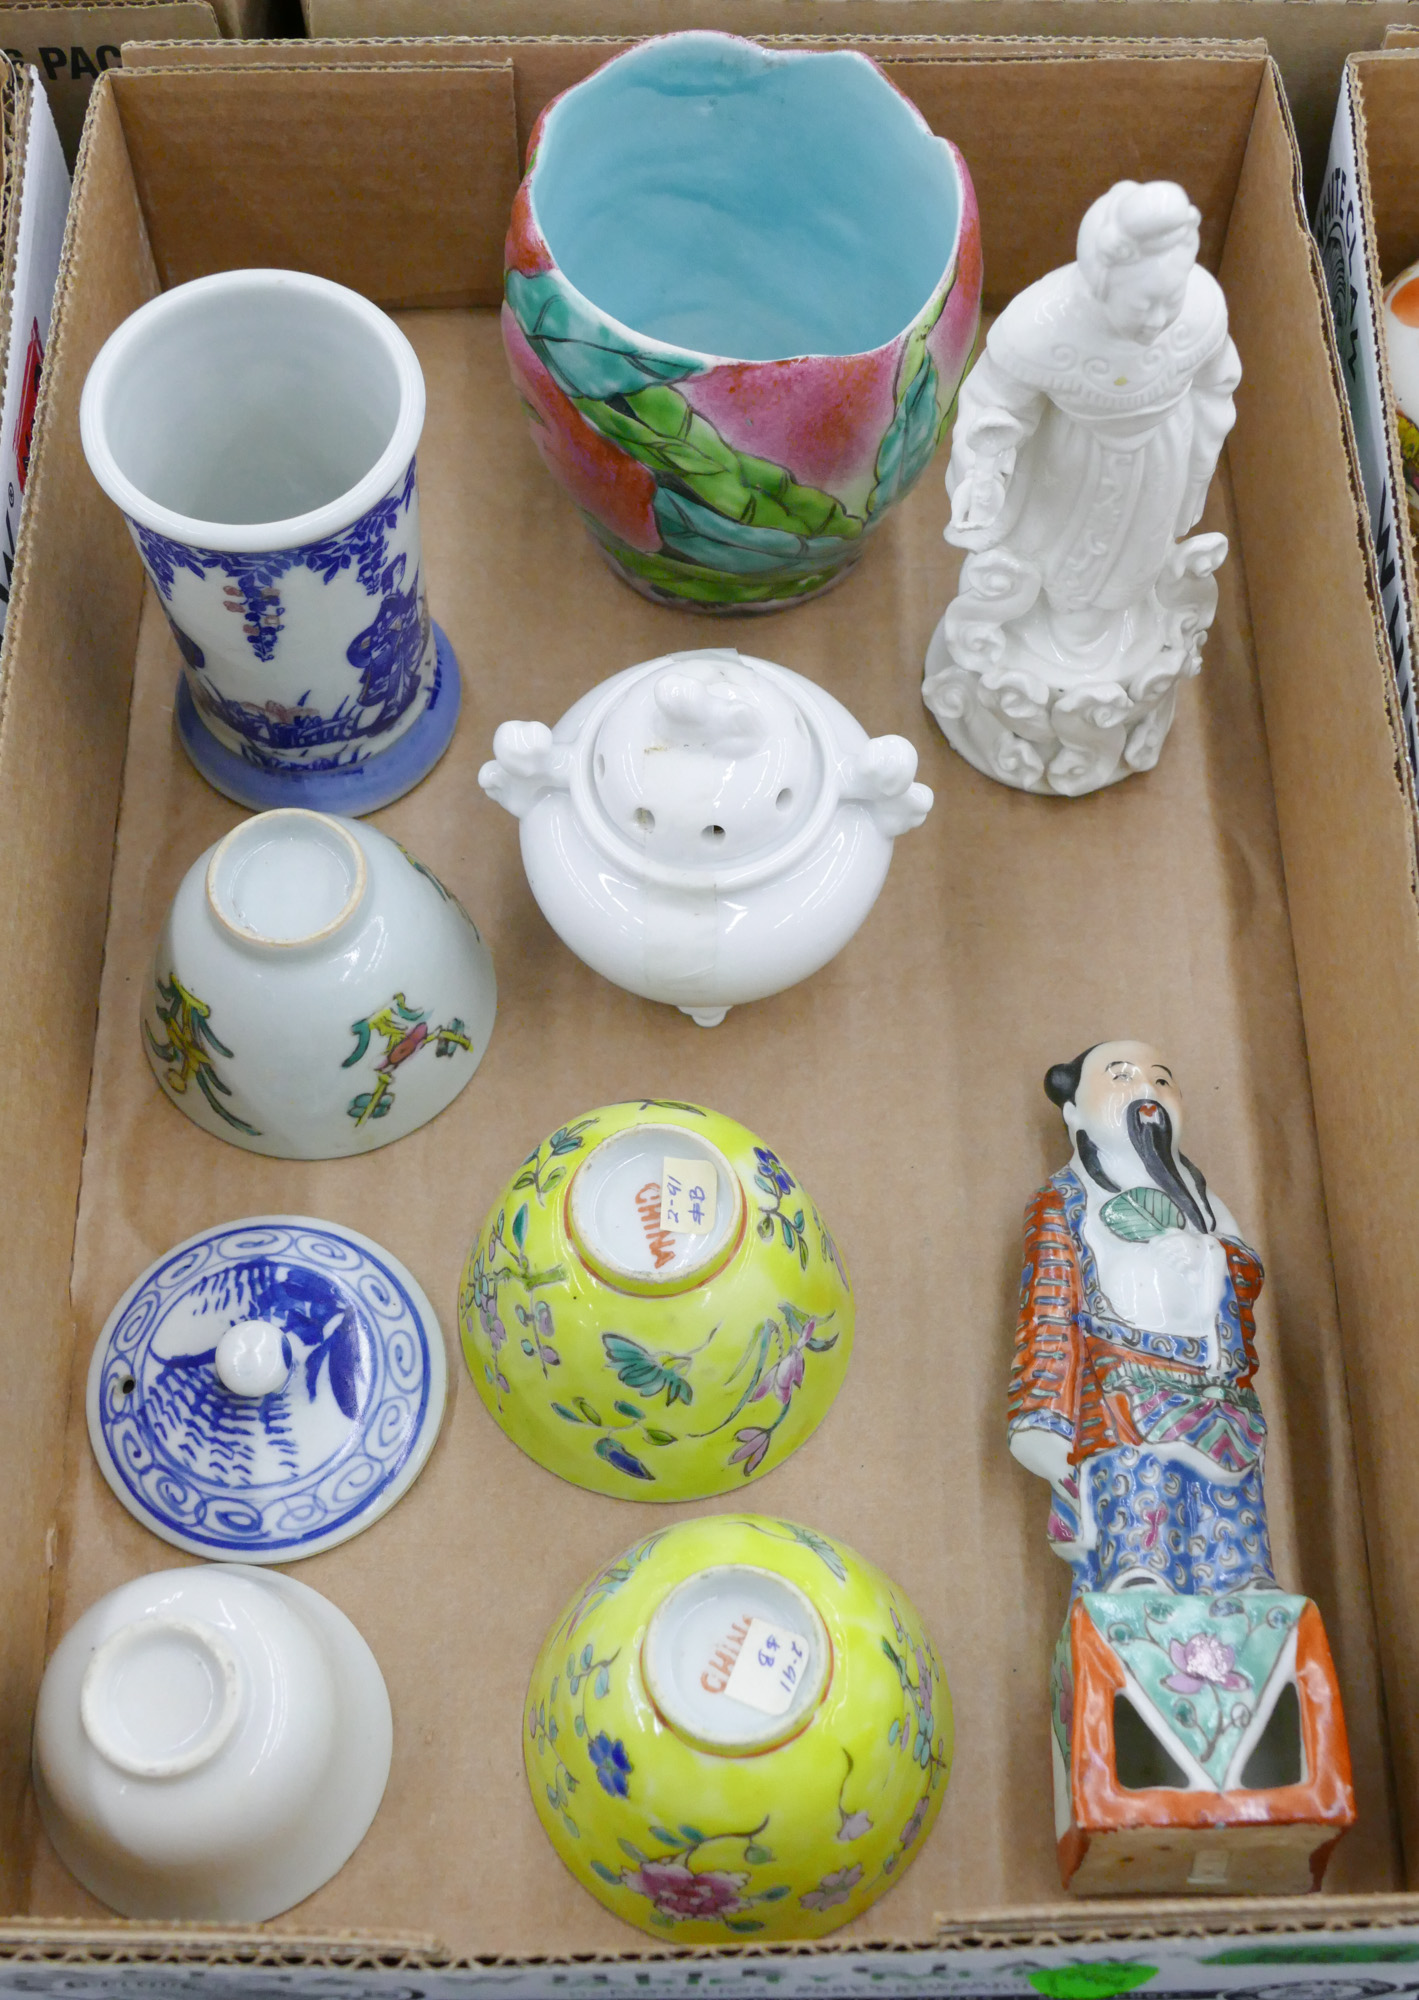 Box Old Chinese Porcelain Cups 3688d9